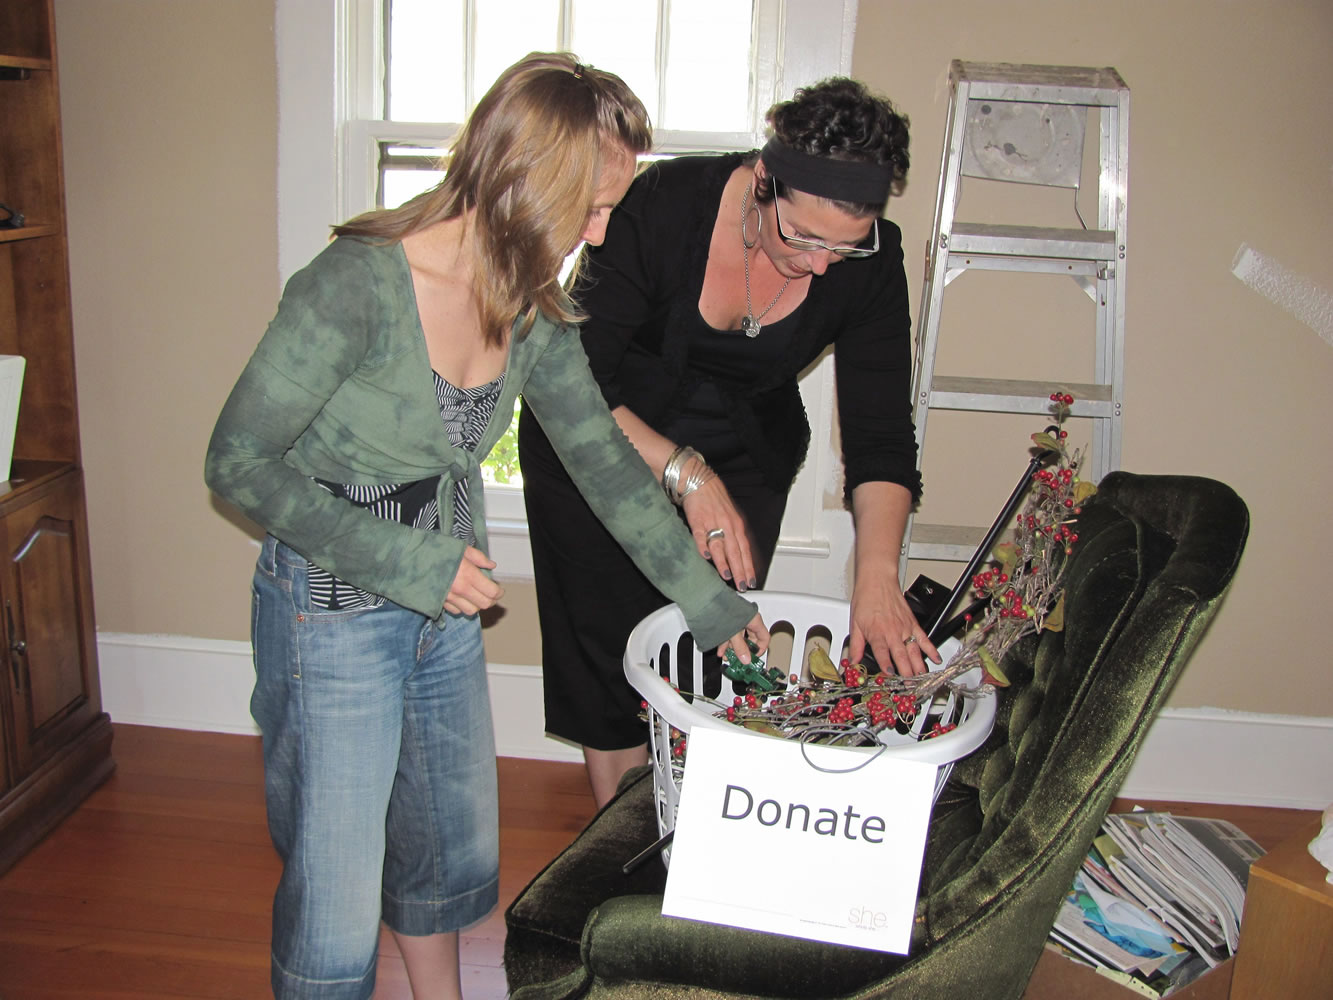 Professional organizer Krista Colvin (right) helps Jamie Twyman organize a room so she can offer in-home massage therapy.